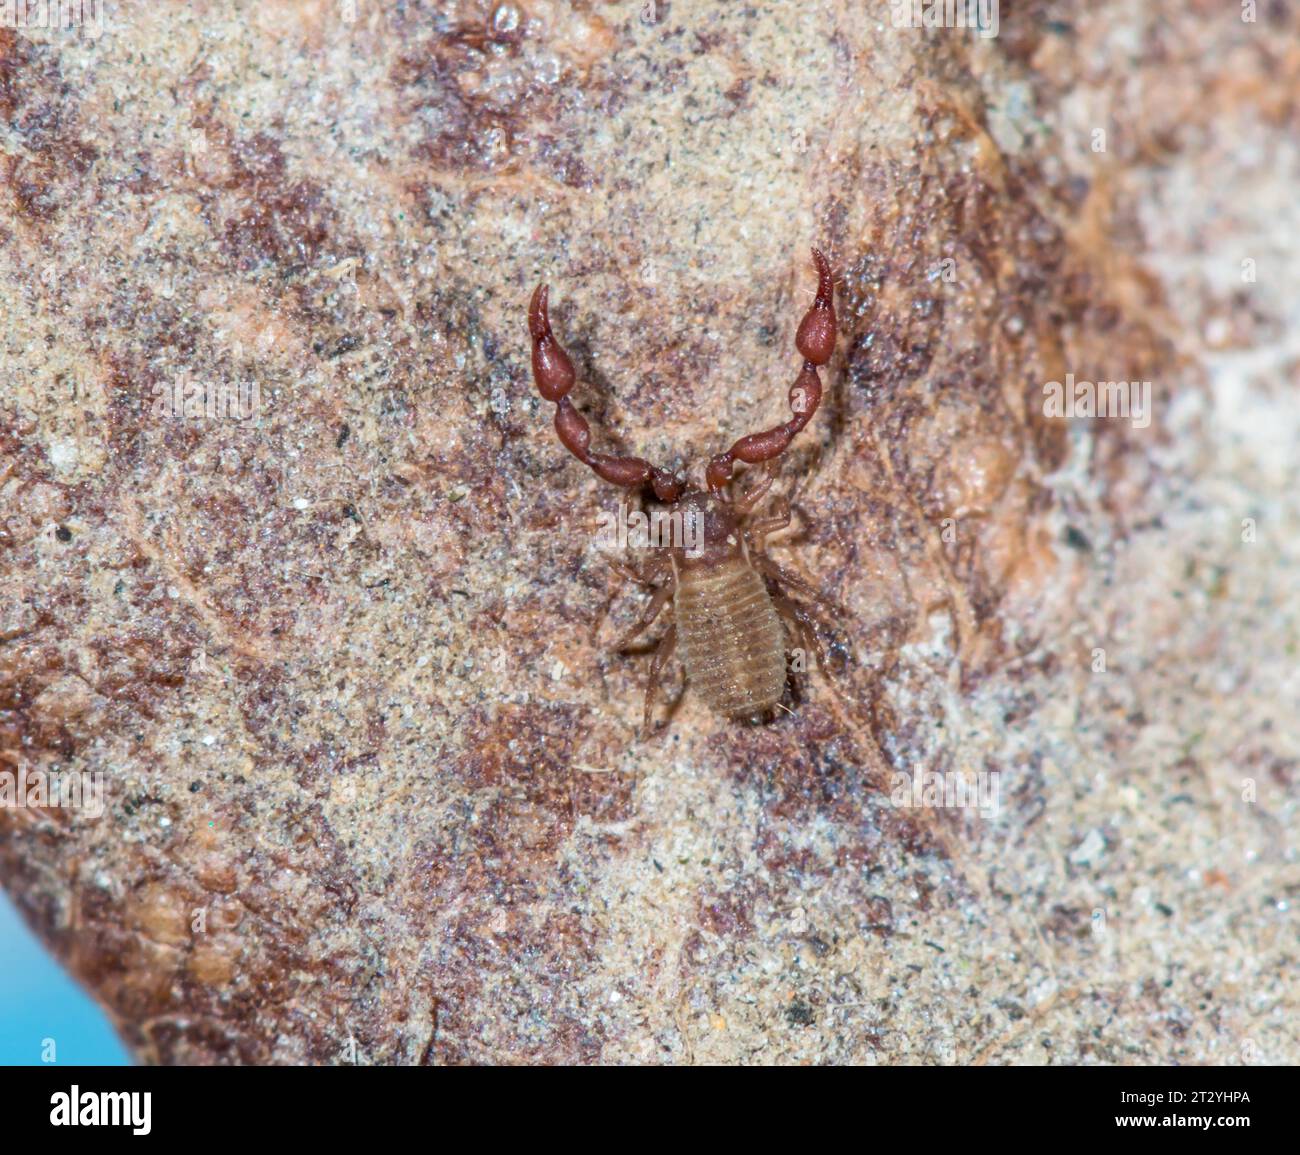 Compost Chernes Chelifer Pseudoscorpion (Pselaphochernes scorpioides) from Wood Ant nest. Sussex, UK Stock Photo